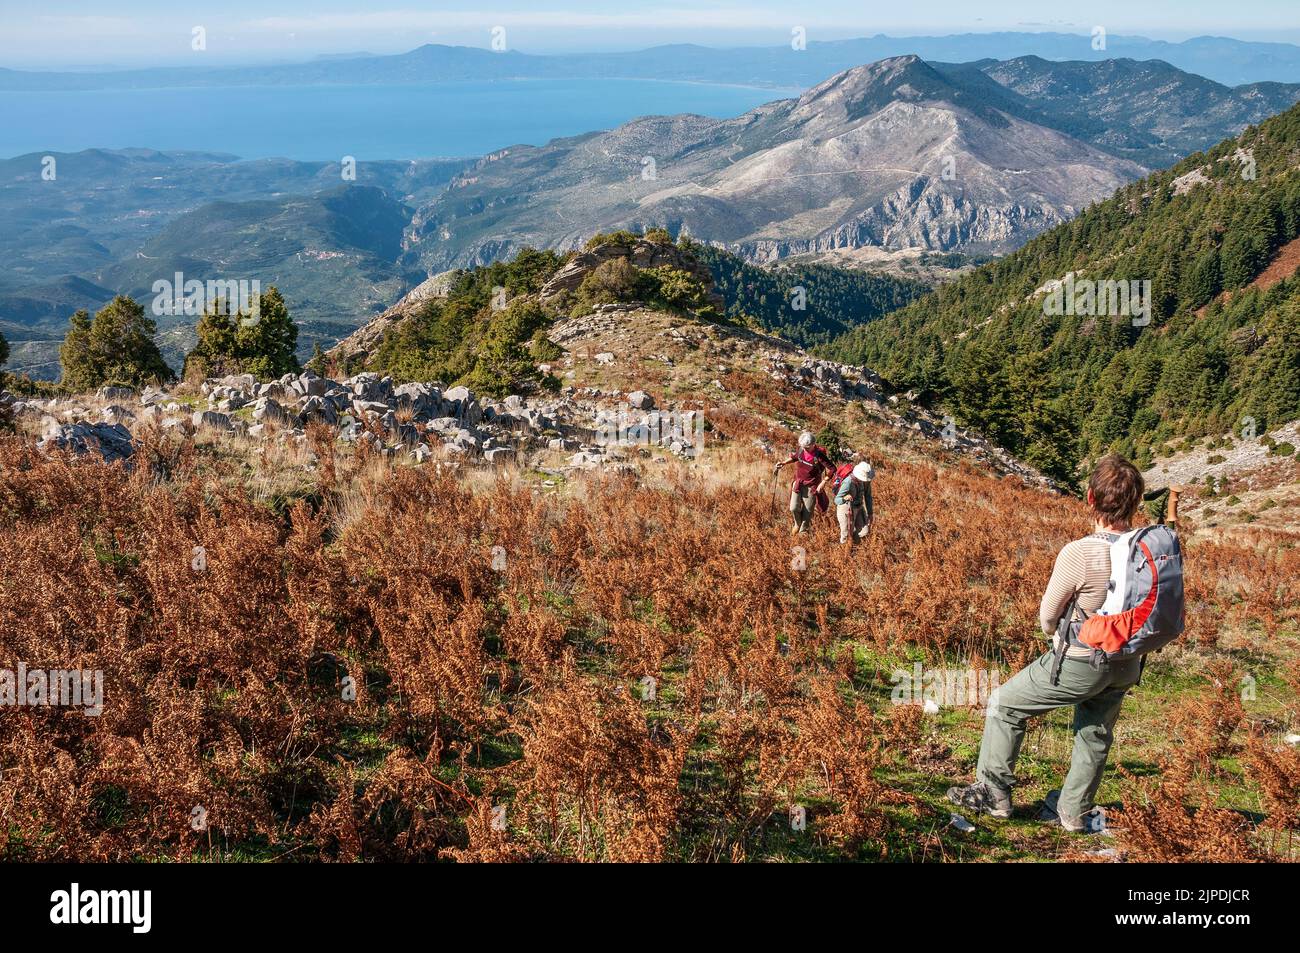 A walker looks down on the Outer Mani coast towards Kalamata and across the Gulf of Messini, from Niva hill above Voria, in the Taygetos mountains, So Stock Photo